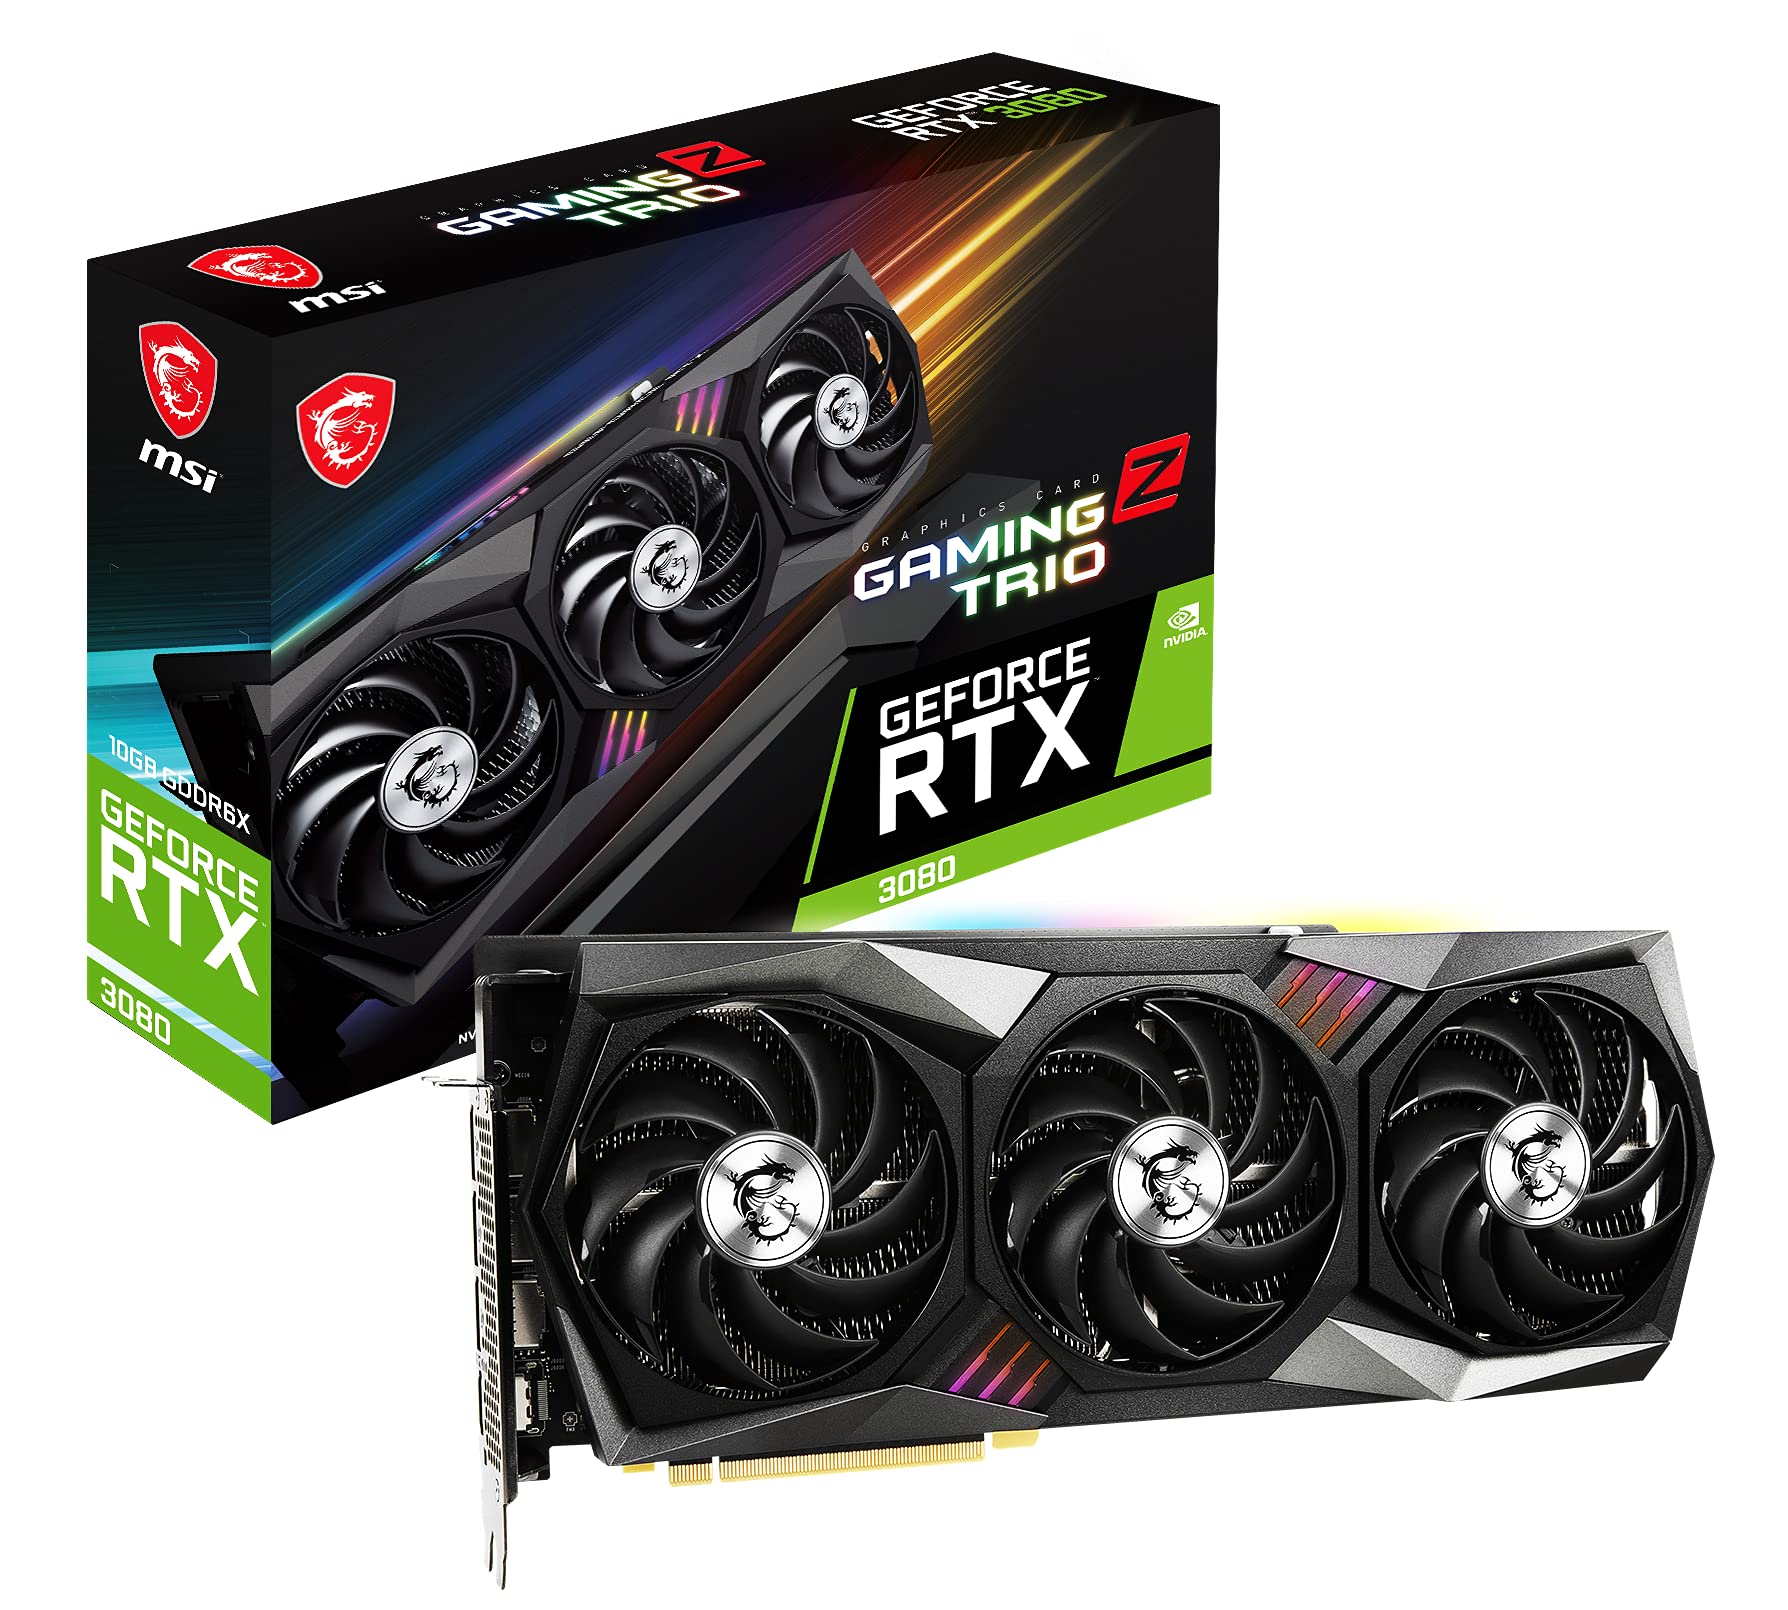 You are currently viewing Comparing RTX 3080 and AORUS AORUS A770 GPUs